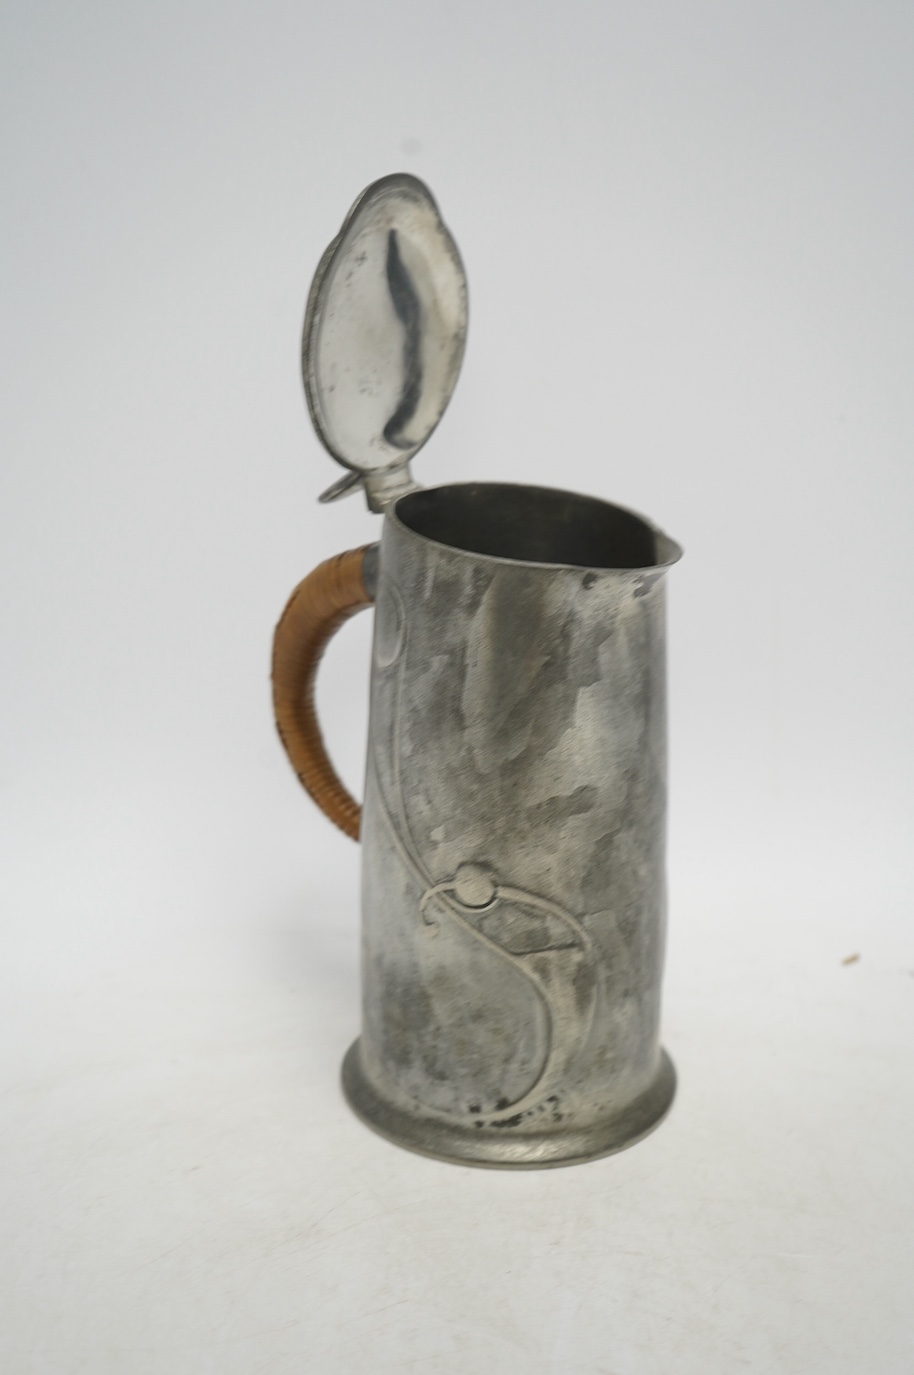 Archibald Knox, an Arts & Crafts Tudric pewter jug, with wicker handle, numbered 0305, 21cm high. Condition - good